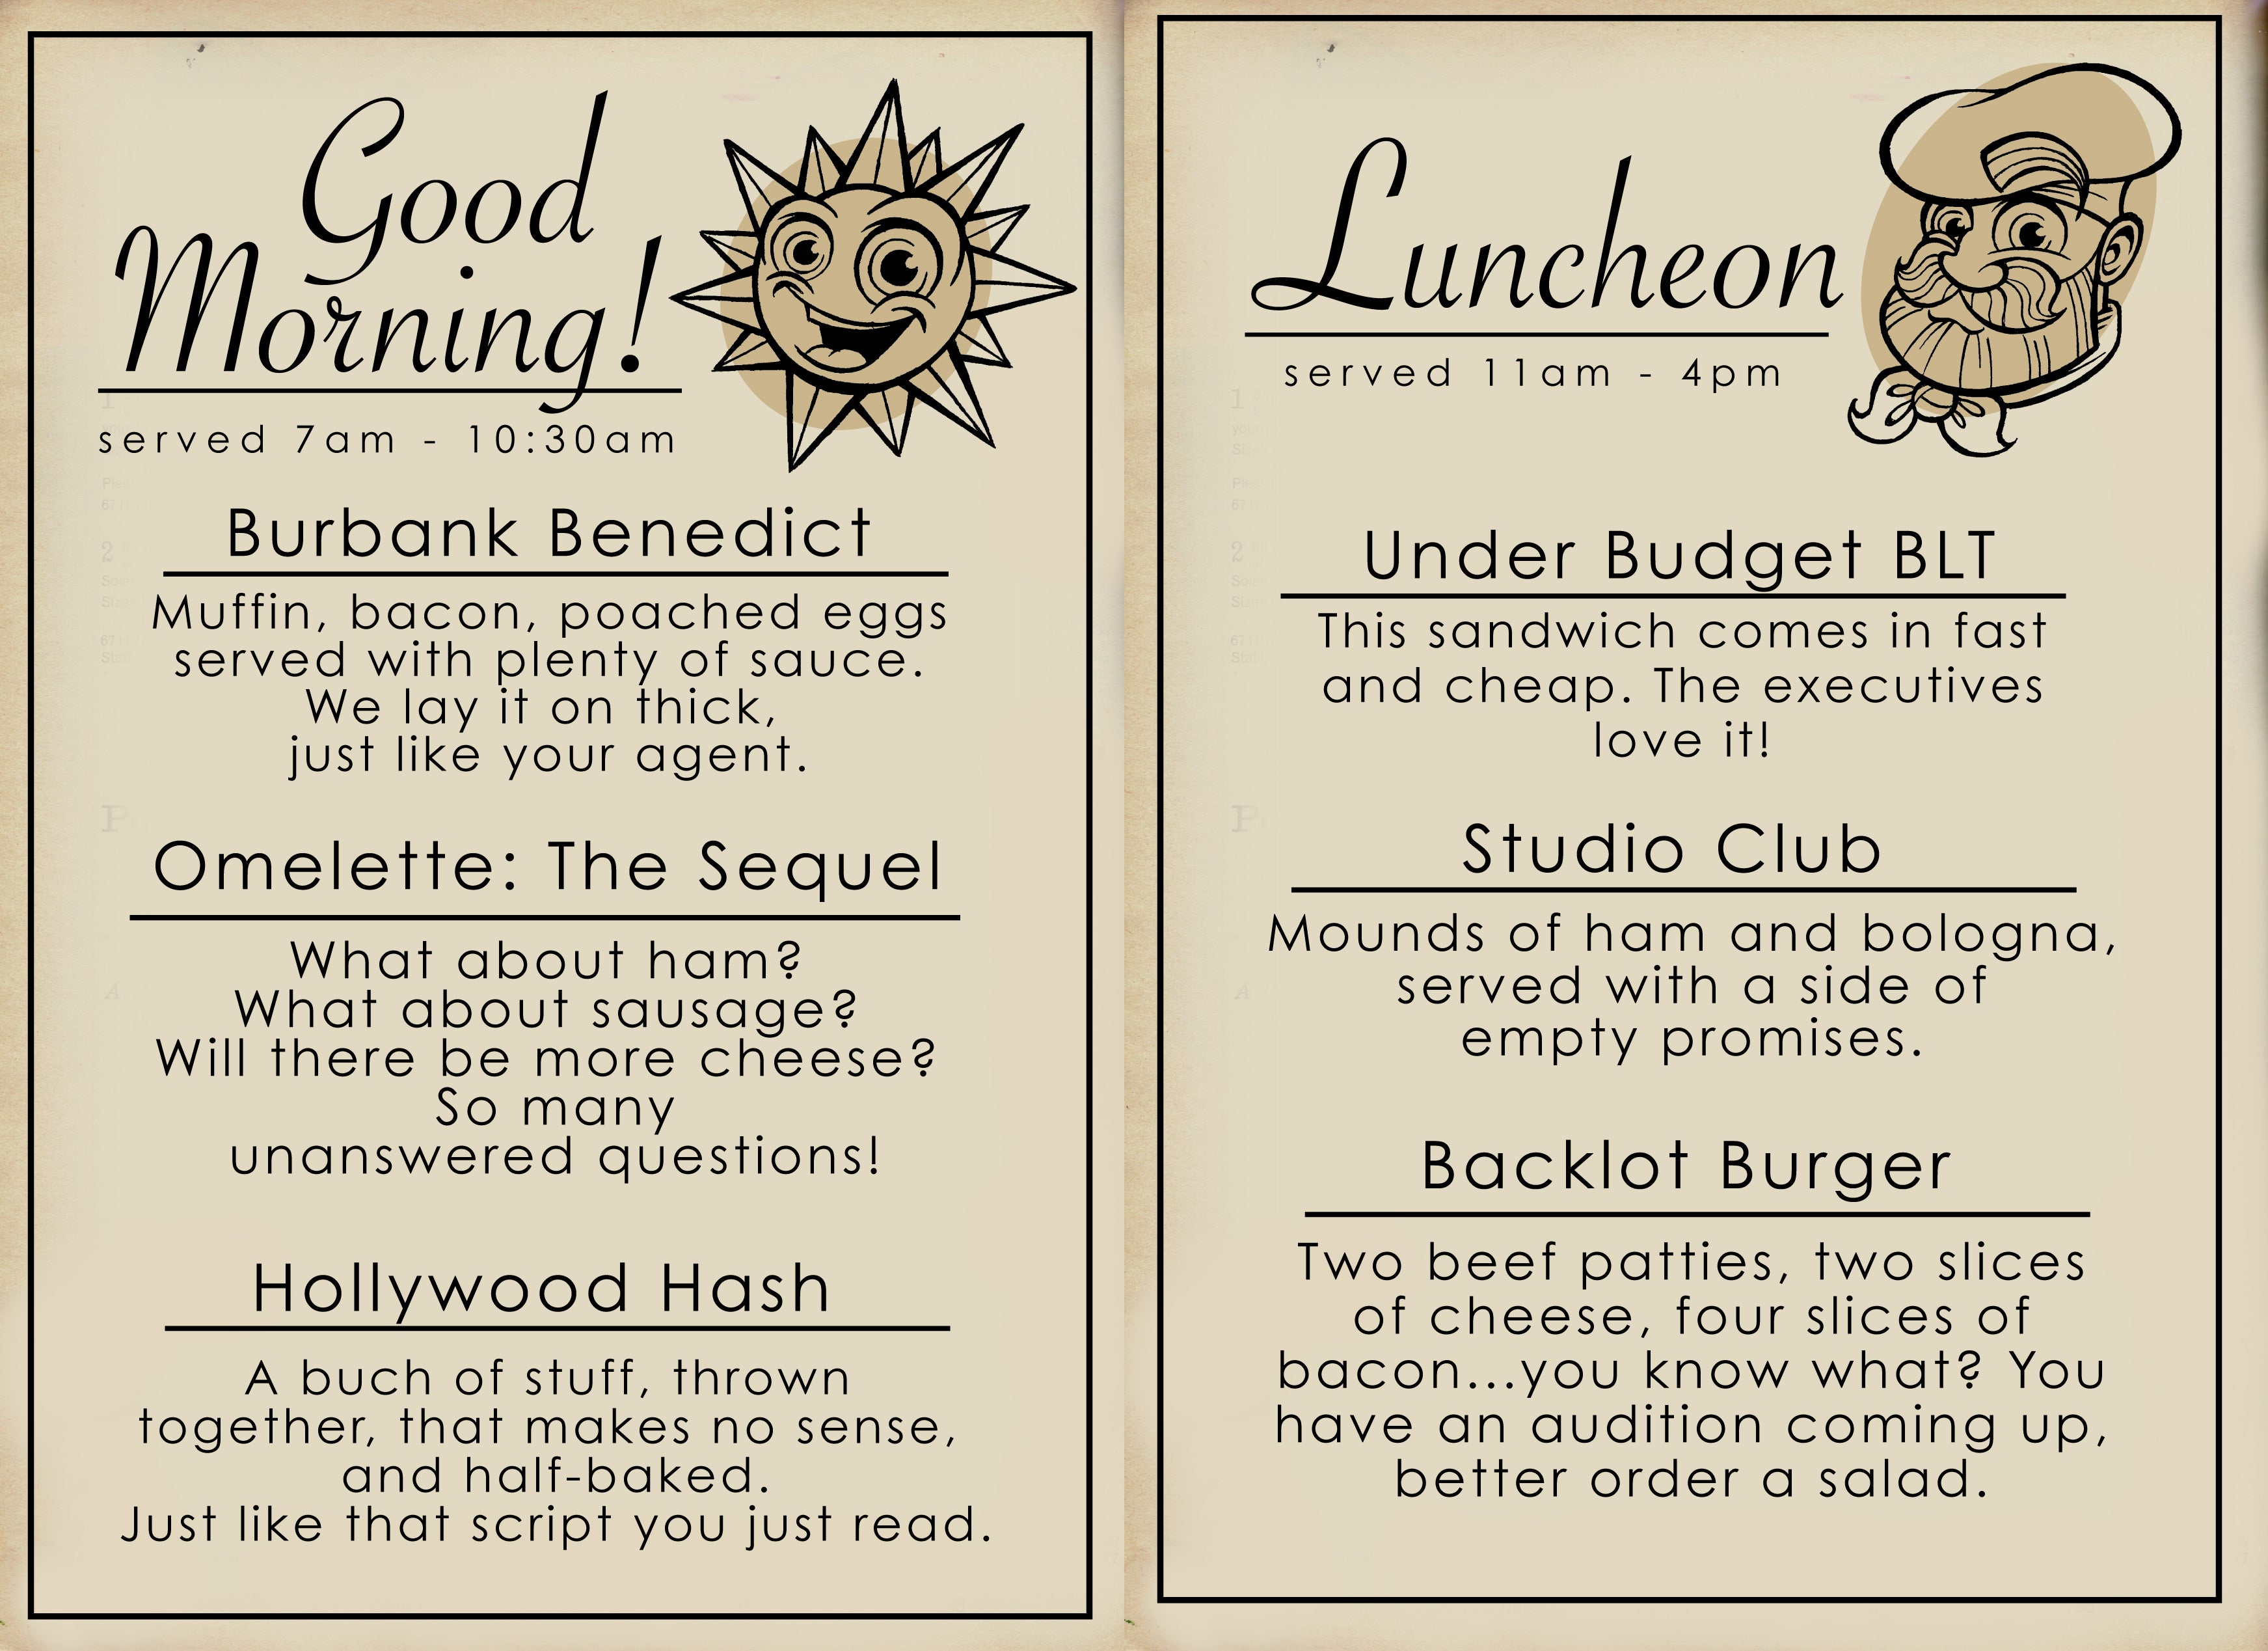 Image shows an open menu, with a breakfast side, and a luncheon side. Various, humorous menu items are listed.